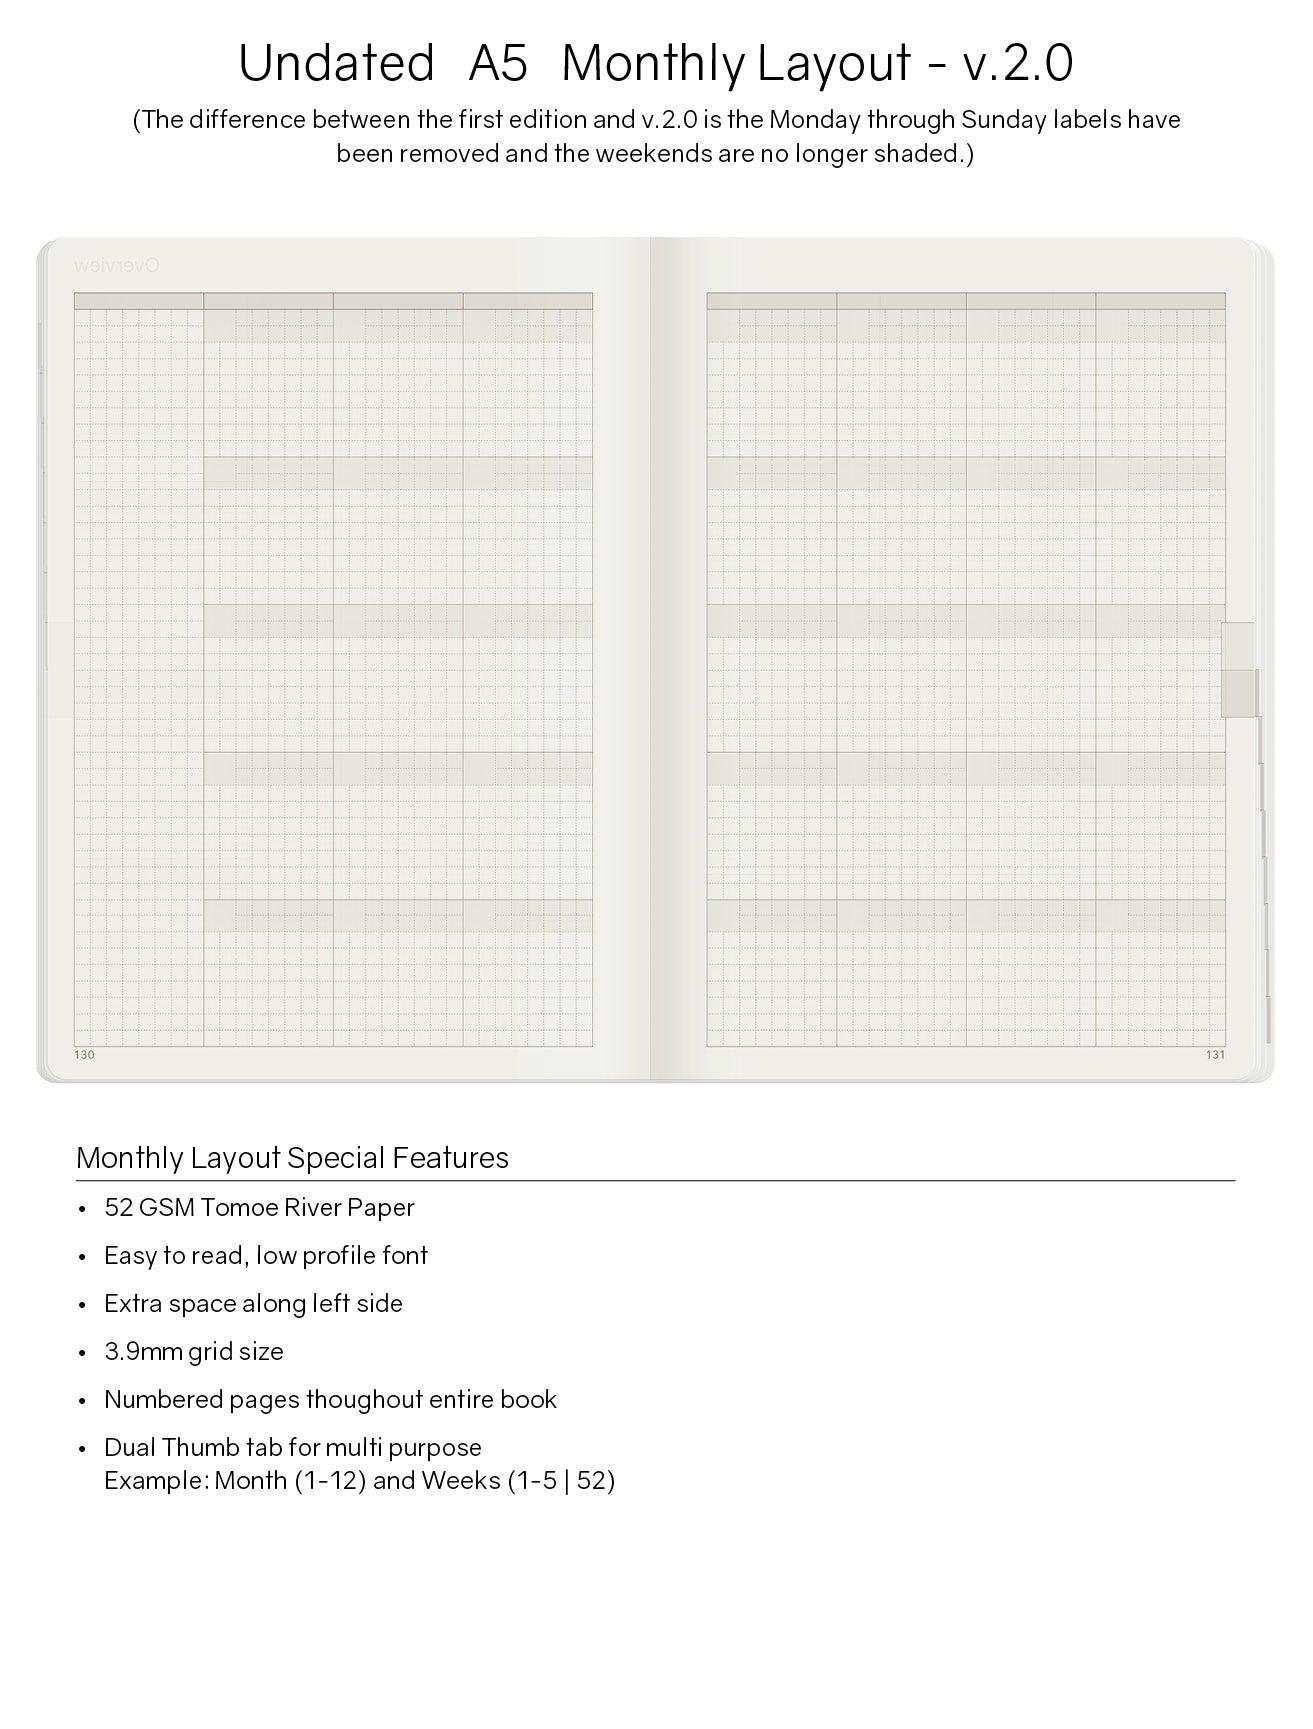 A5 Undated Weekly Planner v.2 - 52gsm Tomoe River Paper